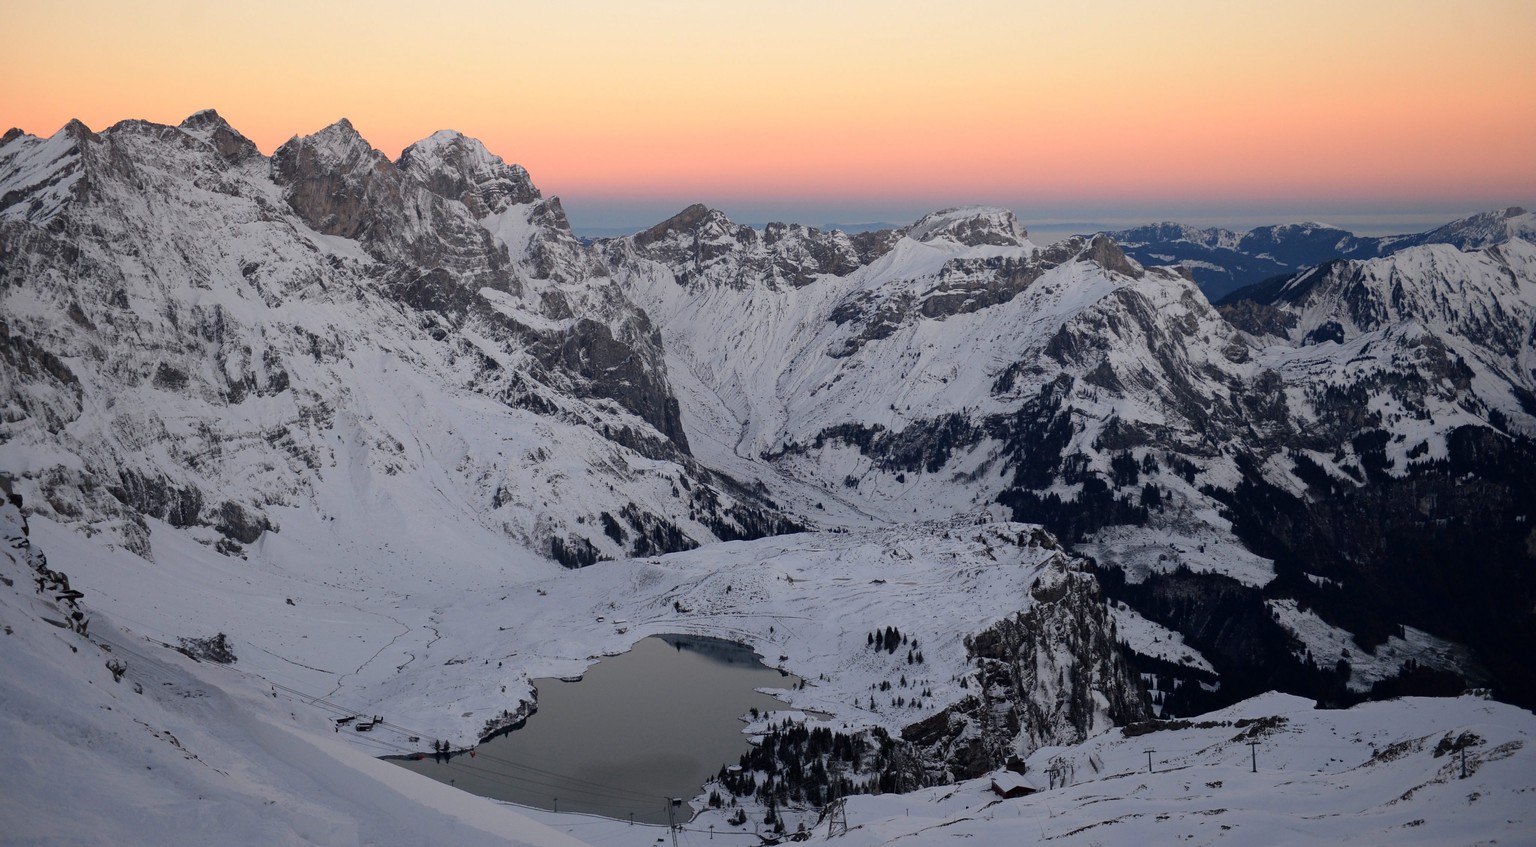 epa04461186 Sunset behind the Engelberg Alps and the Truebsee lake in Engelberg Canton Obwalden seen from Titlis-Stand Station, Switzerland, 24 October 2014. EPA/URS FLUEELER